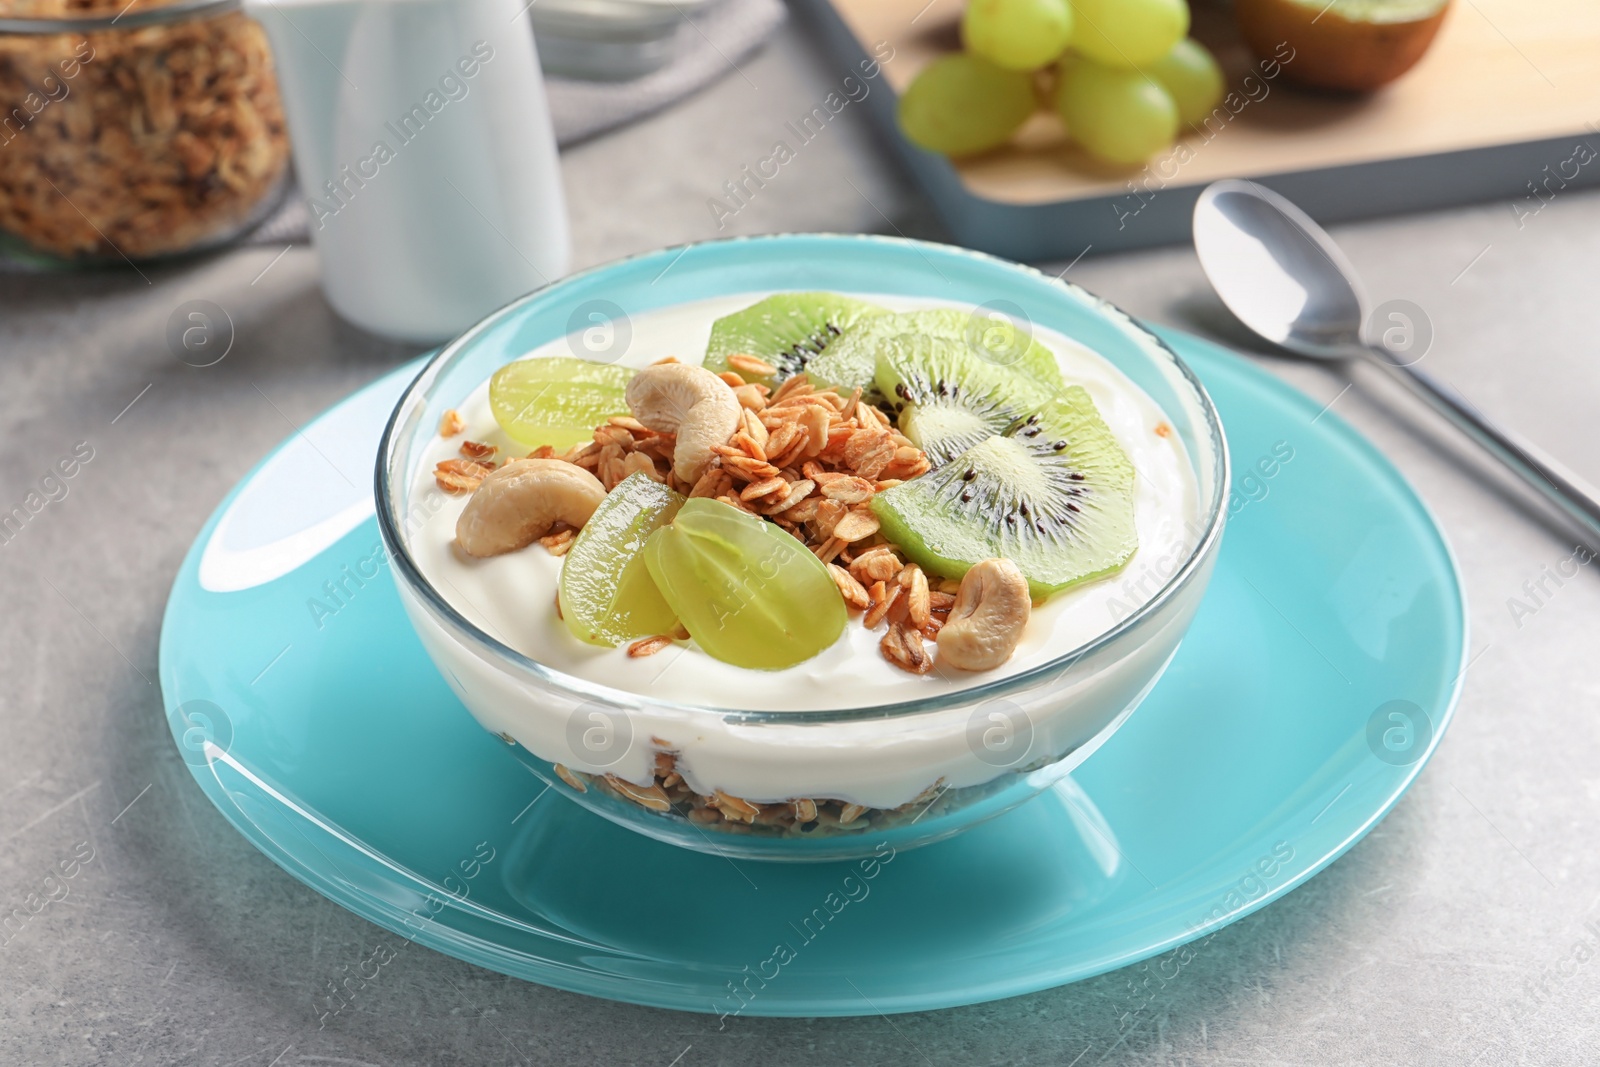 Photo of Bowl with yogurt, fruits and granola on table